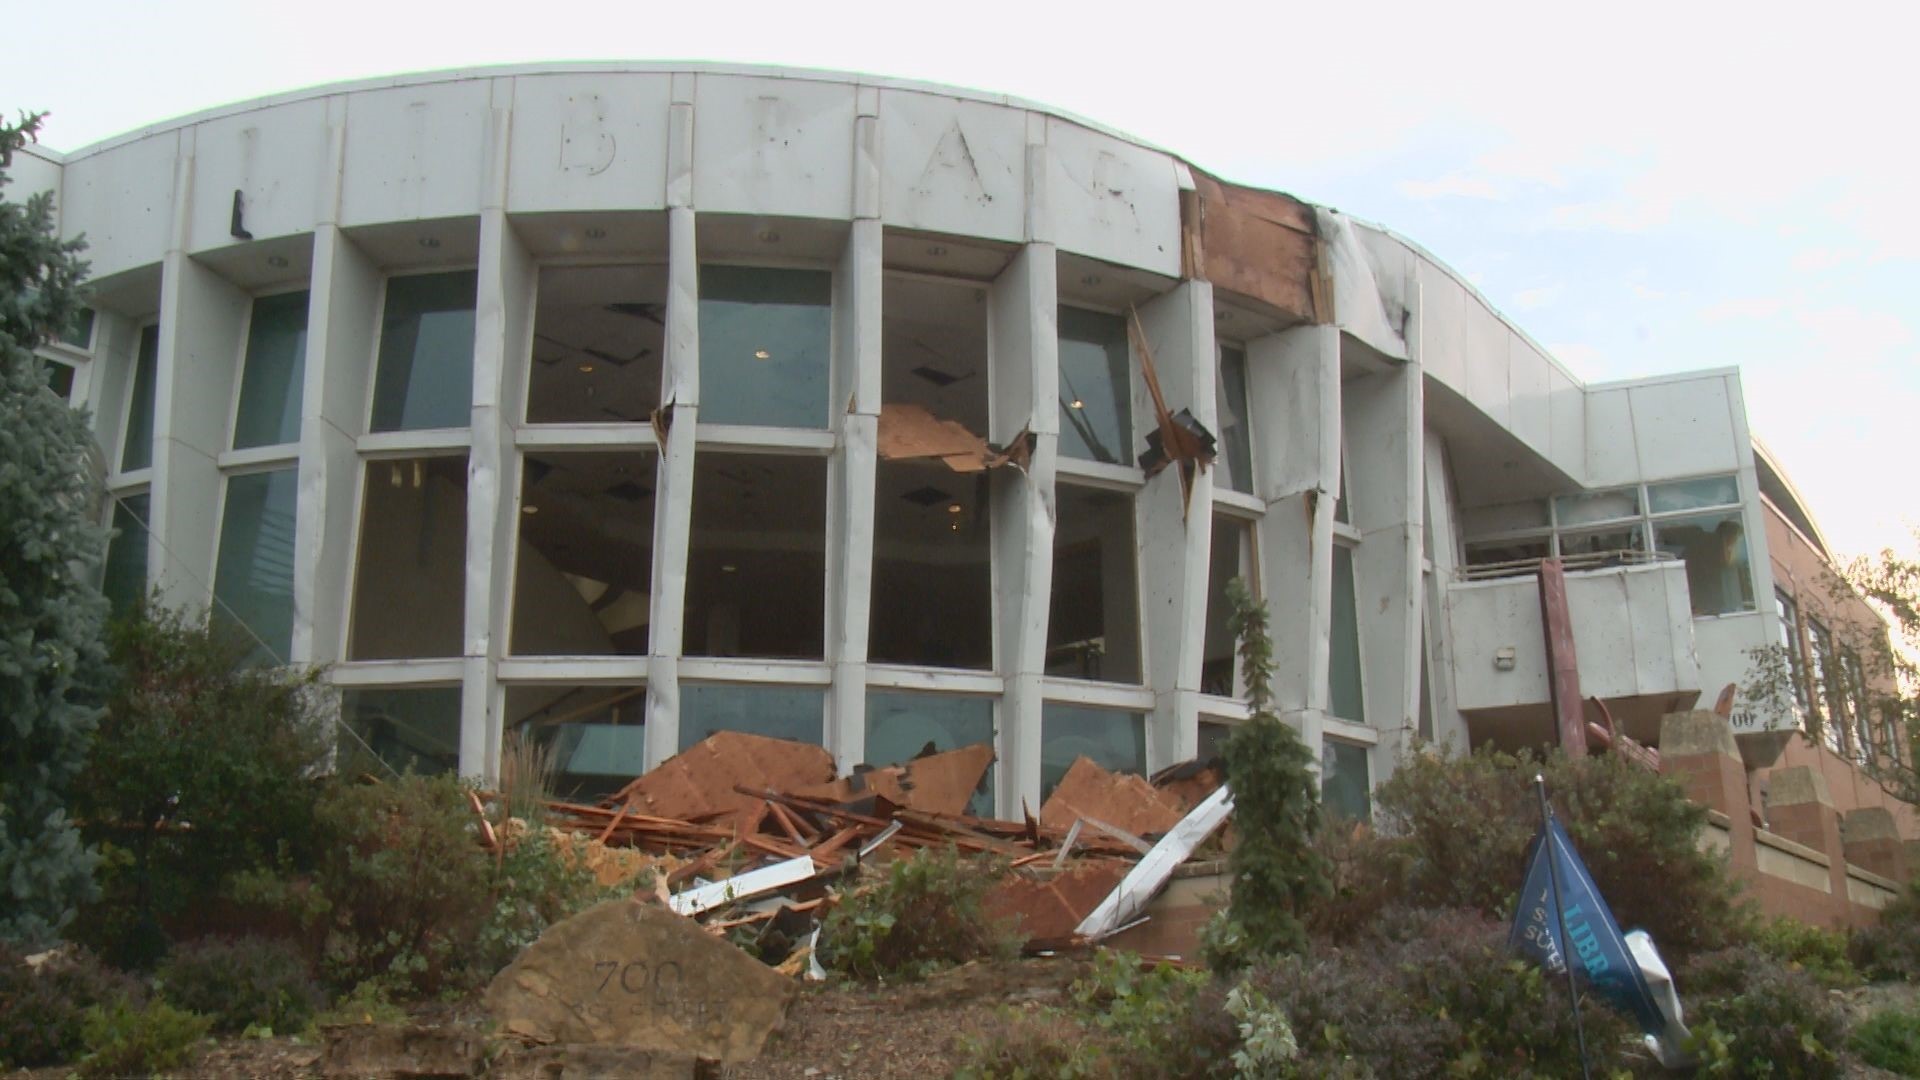 Portions of the library's collection may need to be replaced after the storm knocked out windows and damaged the building.